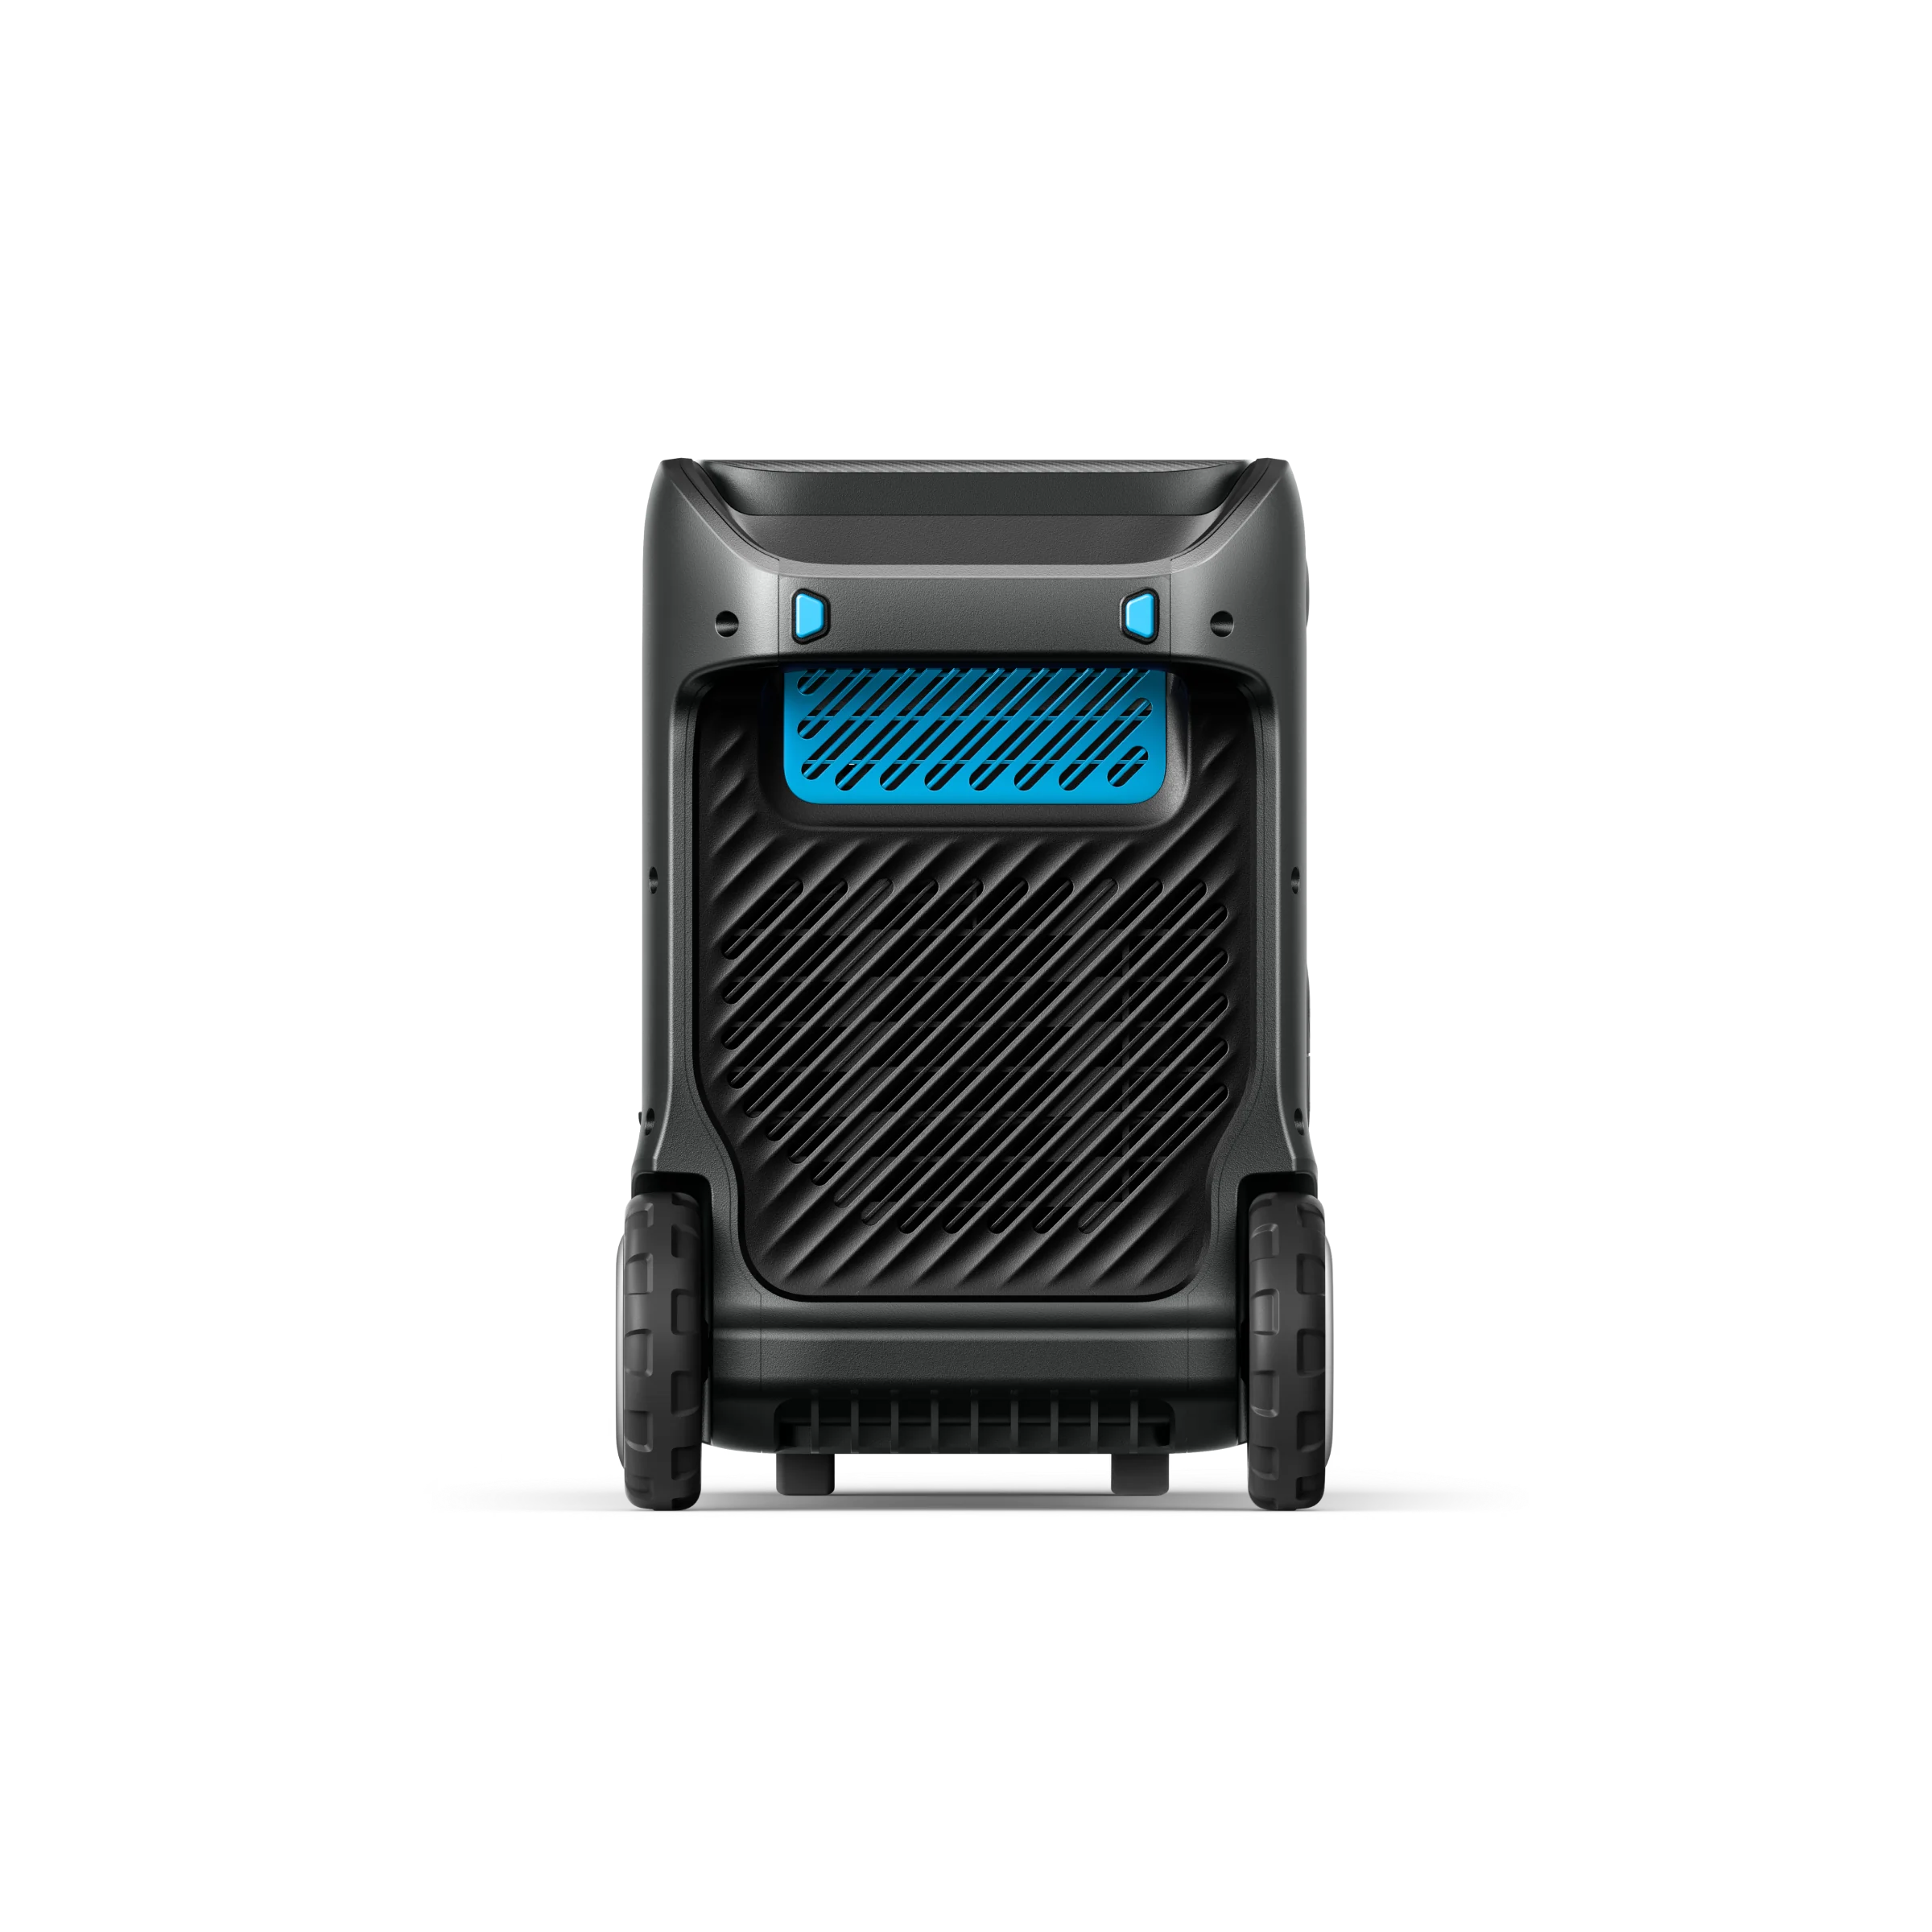 A portable air purifier on wheels for emergency food storage.